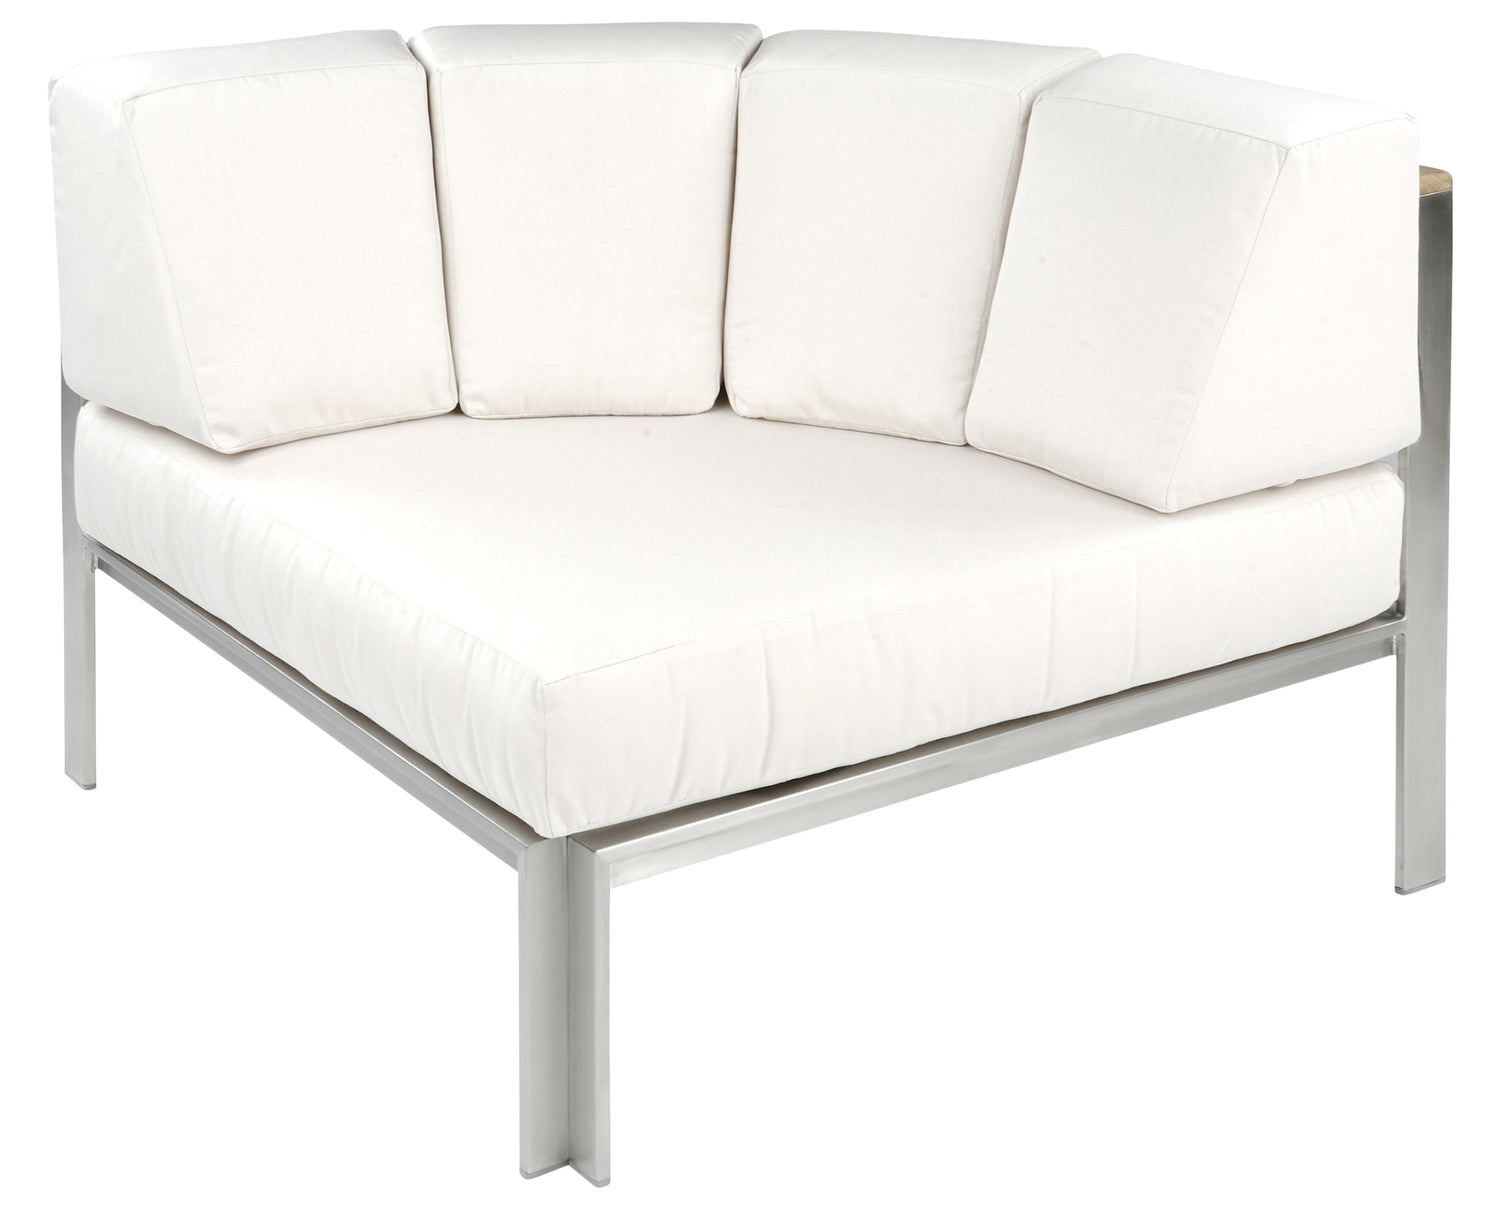 Curved Sectional Corner Chair | Kingsley Bate Tivoli Collection | Valley Ridge Furniture